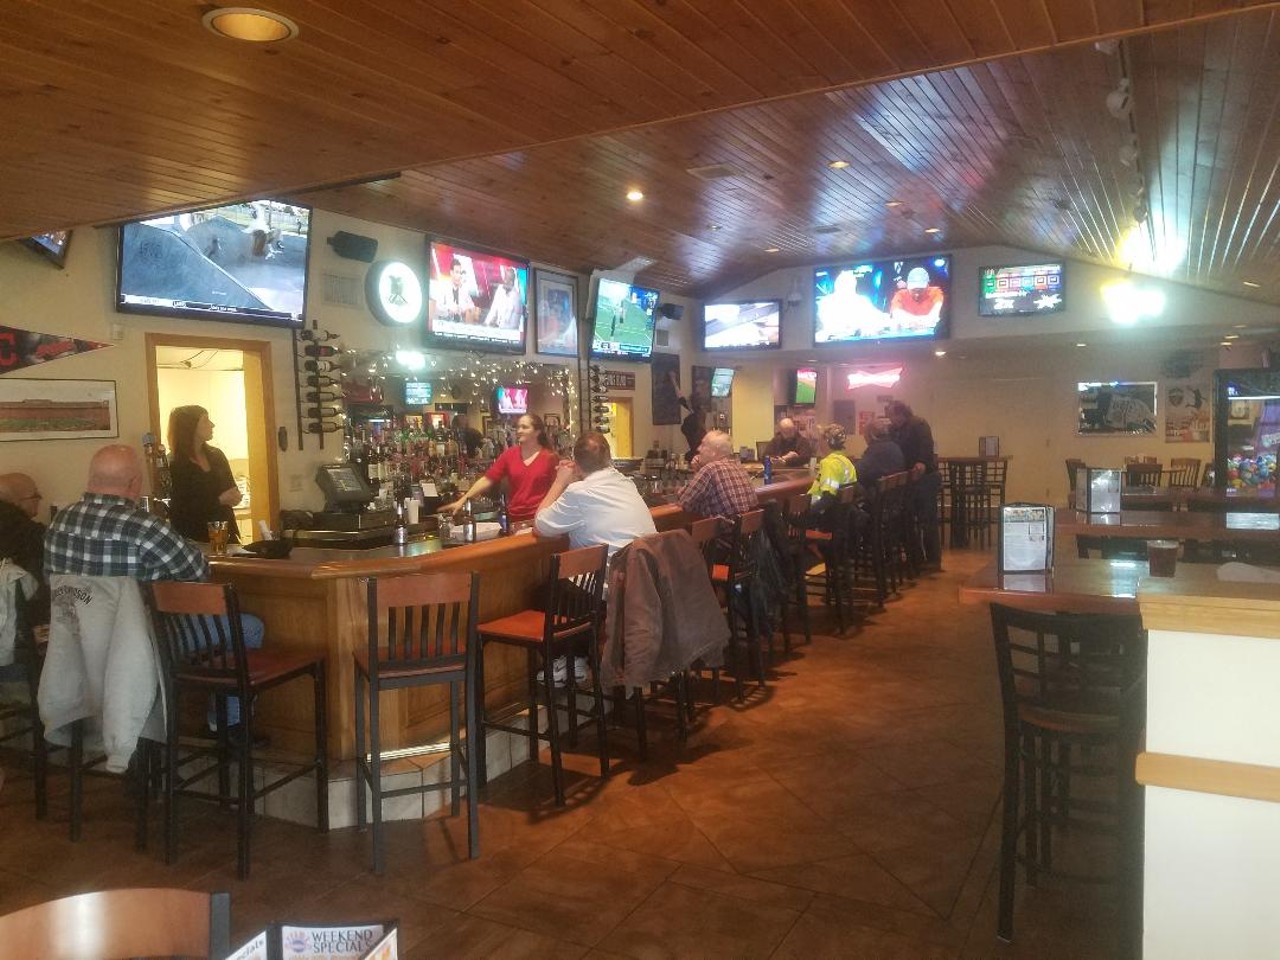 Teamz Restaurant and Bar
6611 Eastland Rd., 440-243-7288
This is a bar full of specials and TVs, where you can enjoy your favorite sports team any day of the week. Ask about their daily specials such as $2 Budweisers, $3 Long Island iced teas and $3 cherry or grape bombs. A TV in every possible corner makes this a great place for watching the Indians. 
Photo by Matthew Poshedley <a